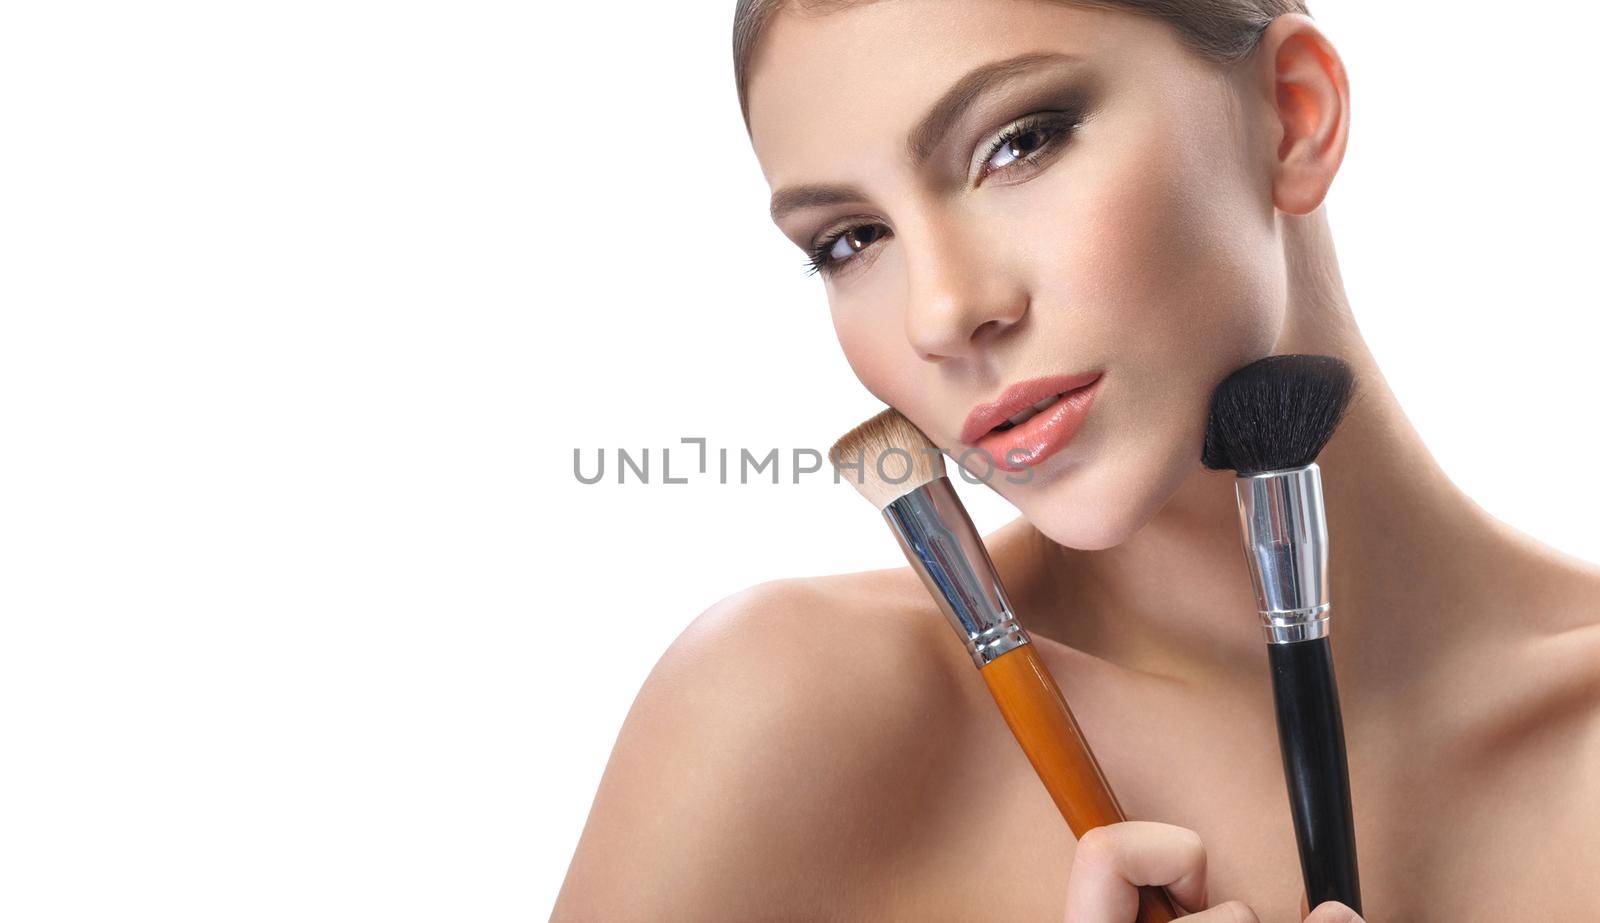 Gorgeous young woman holding makeup brushes isolated on white by SerhiiBobyk